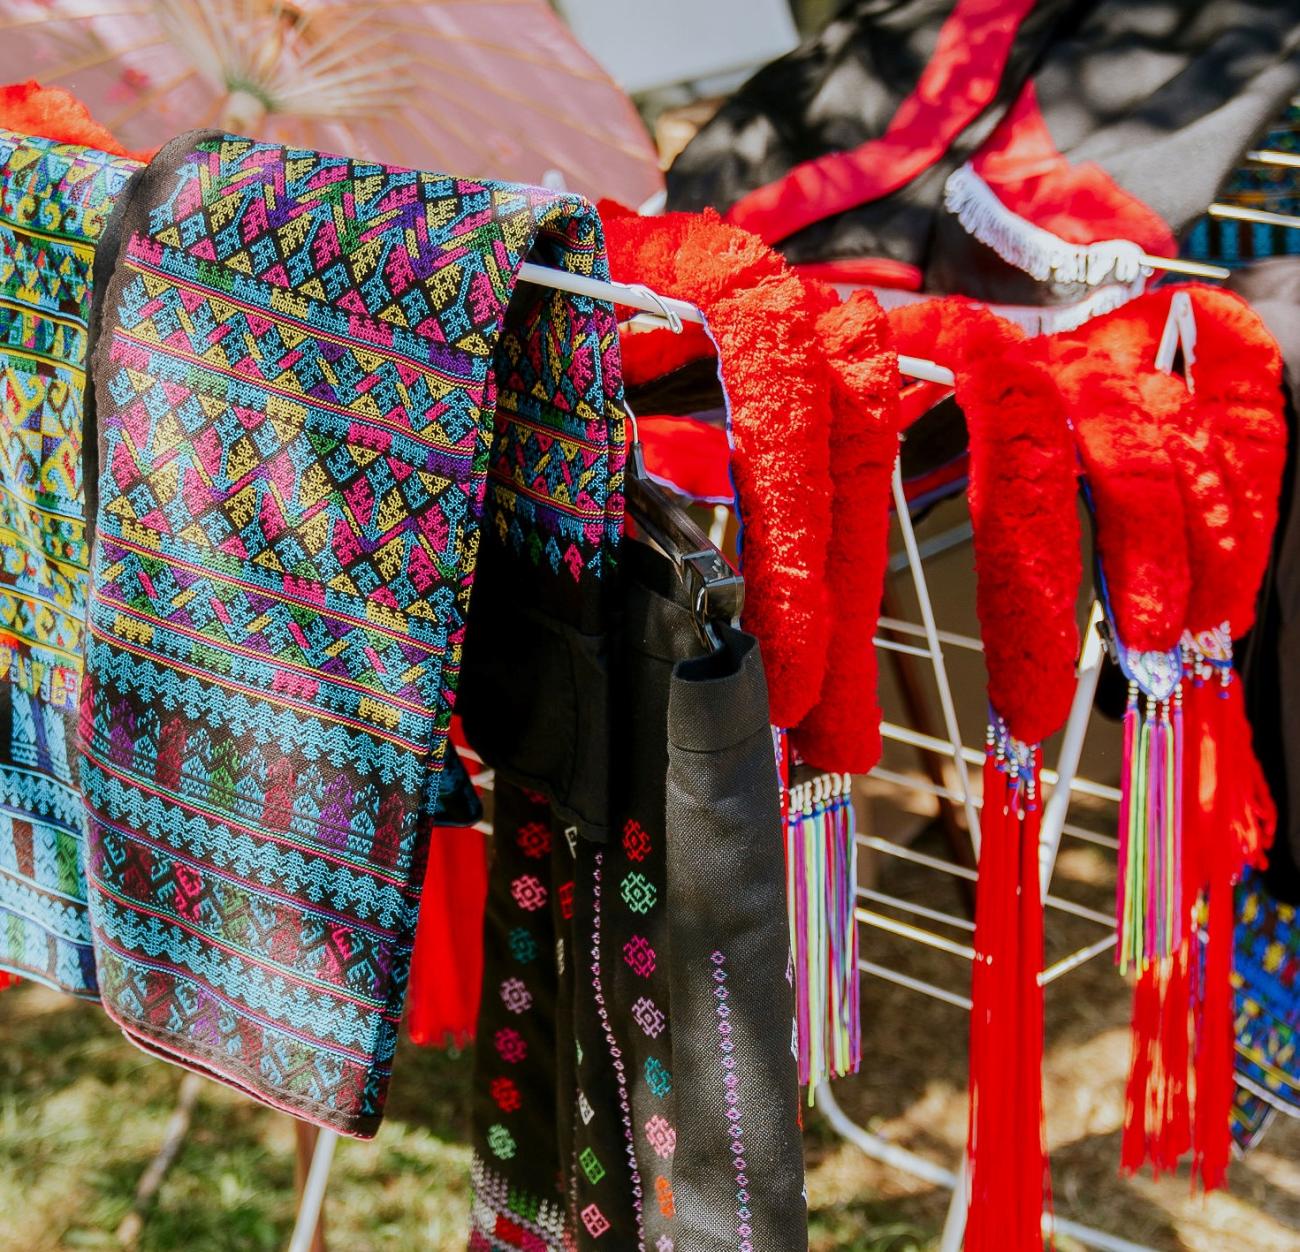 Colorful textiles are draped over hangers